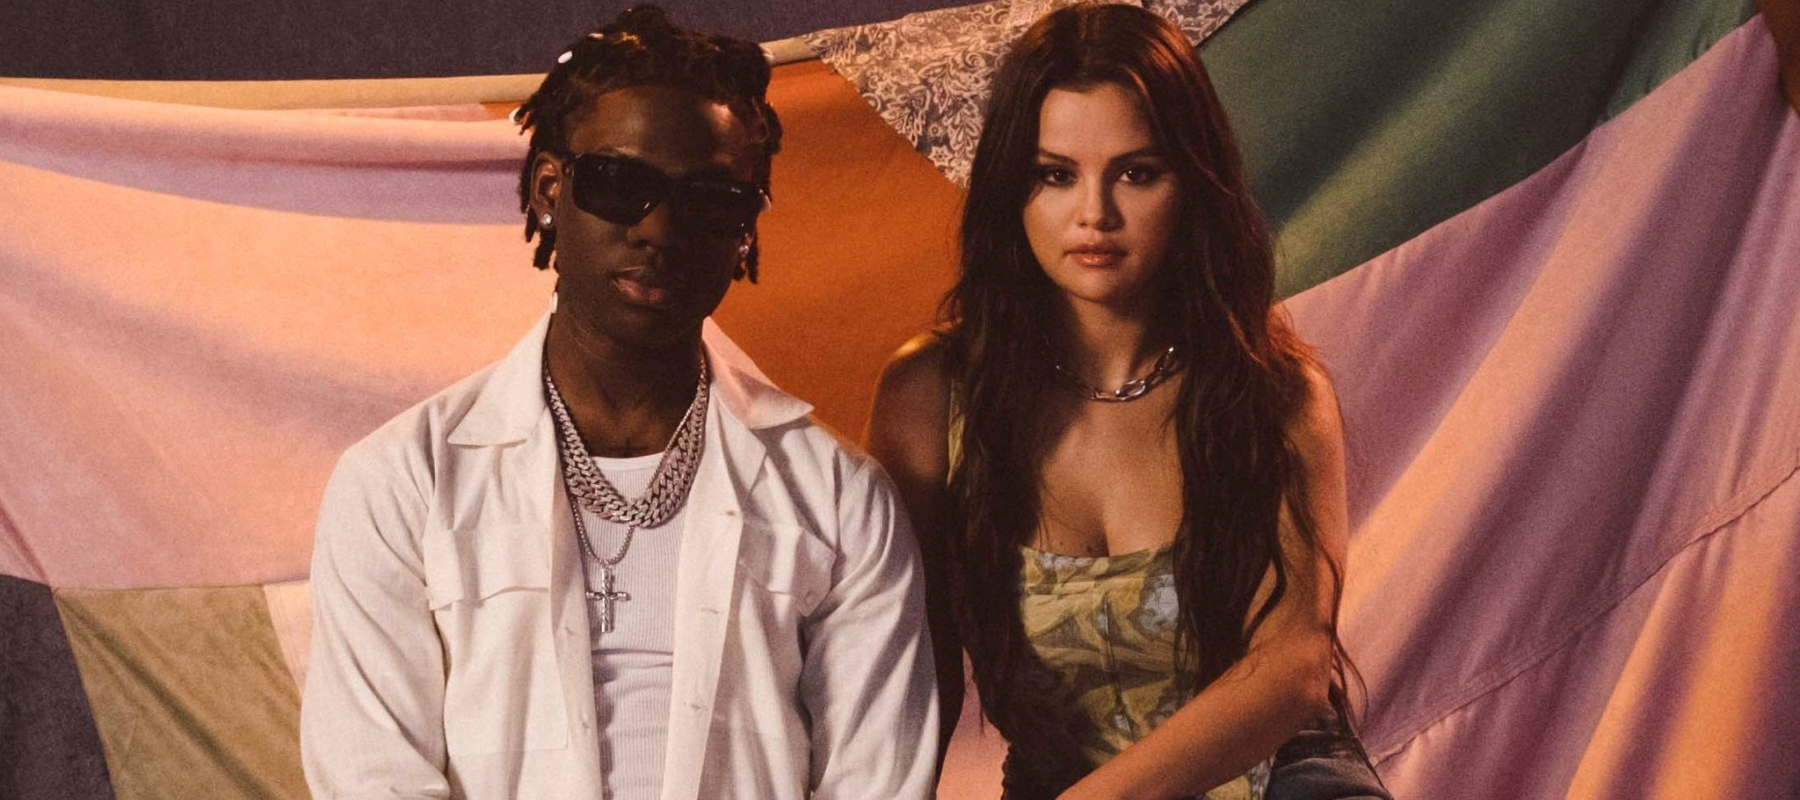 Rema’s “Calm Down” ft Selena Gomez is the First African Song to Hit 1 Billion Streams on Spotify